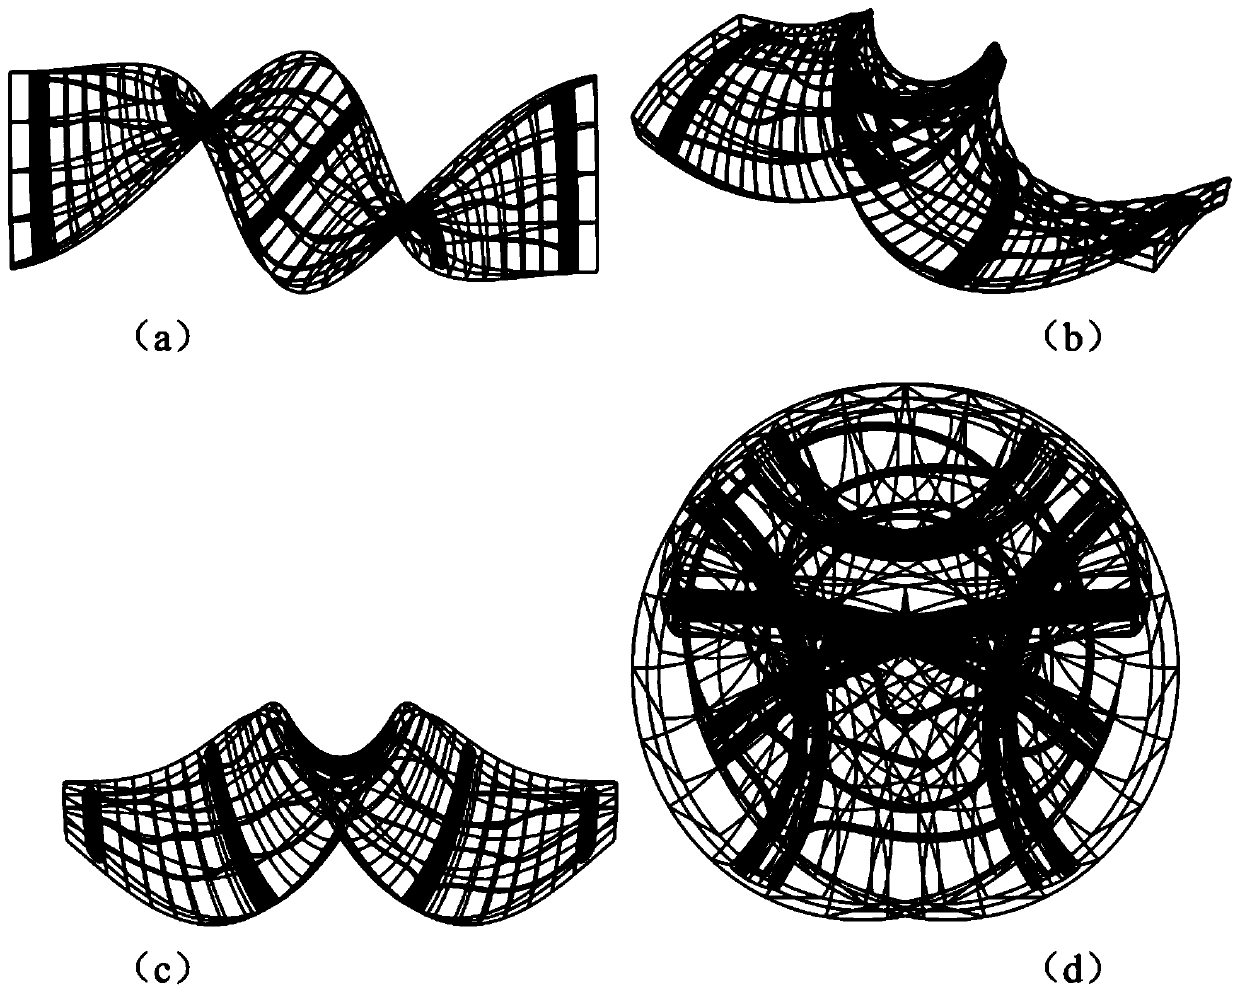 3D printing method of bionic capillary network coated with multi-lamellar unit hydrogel